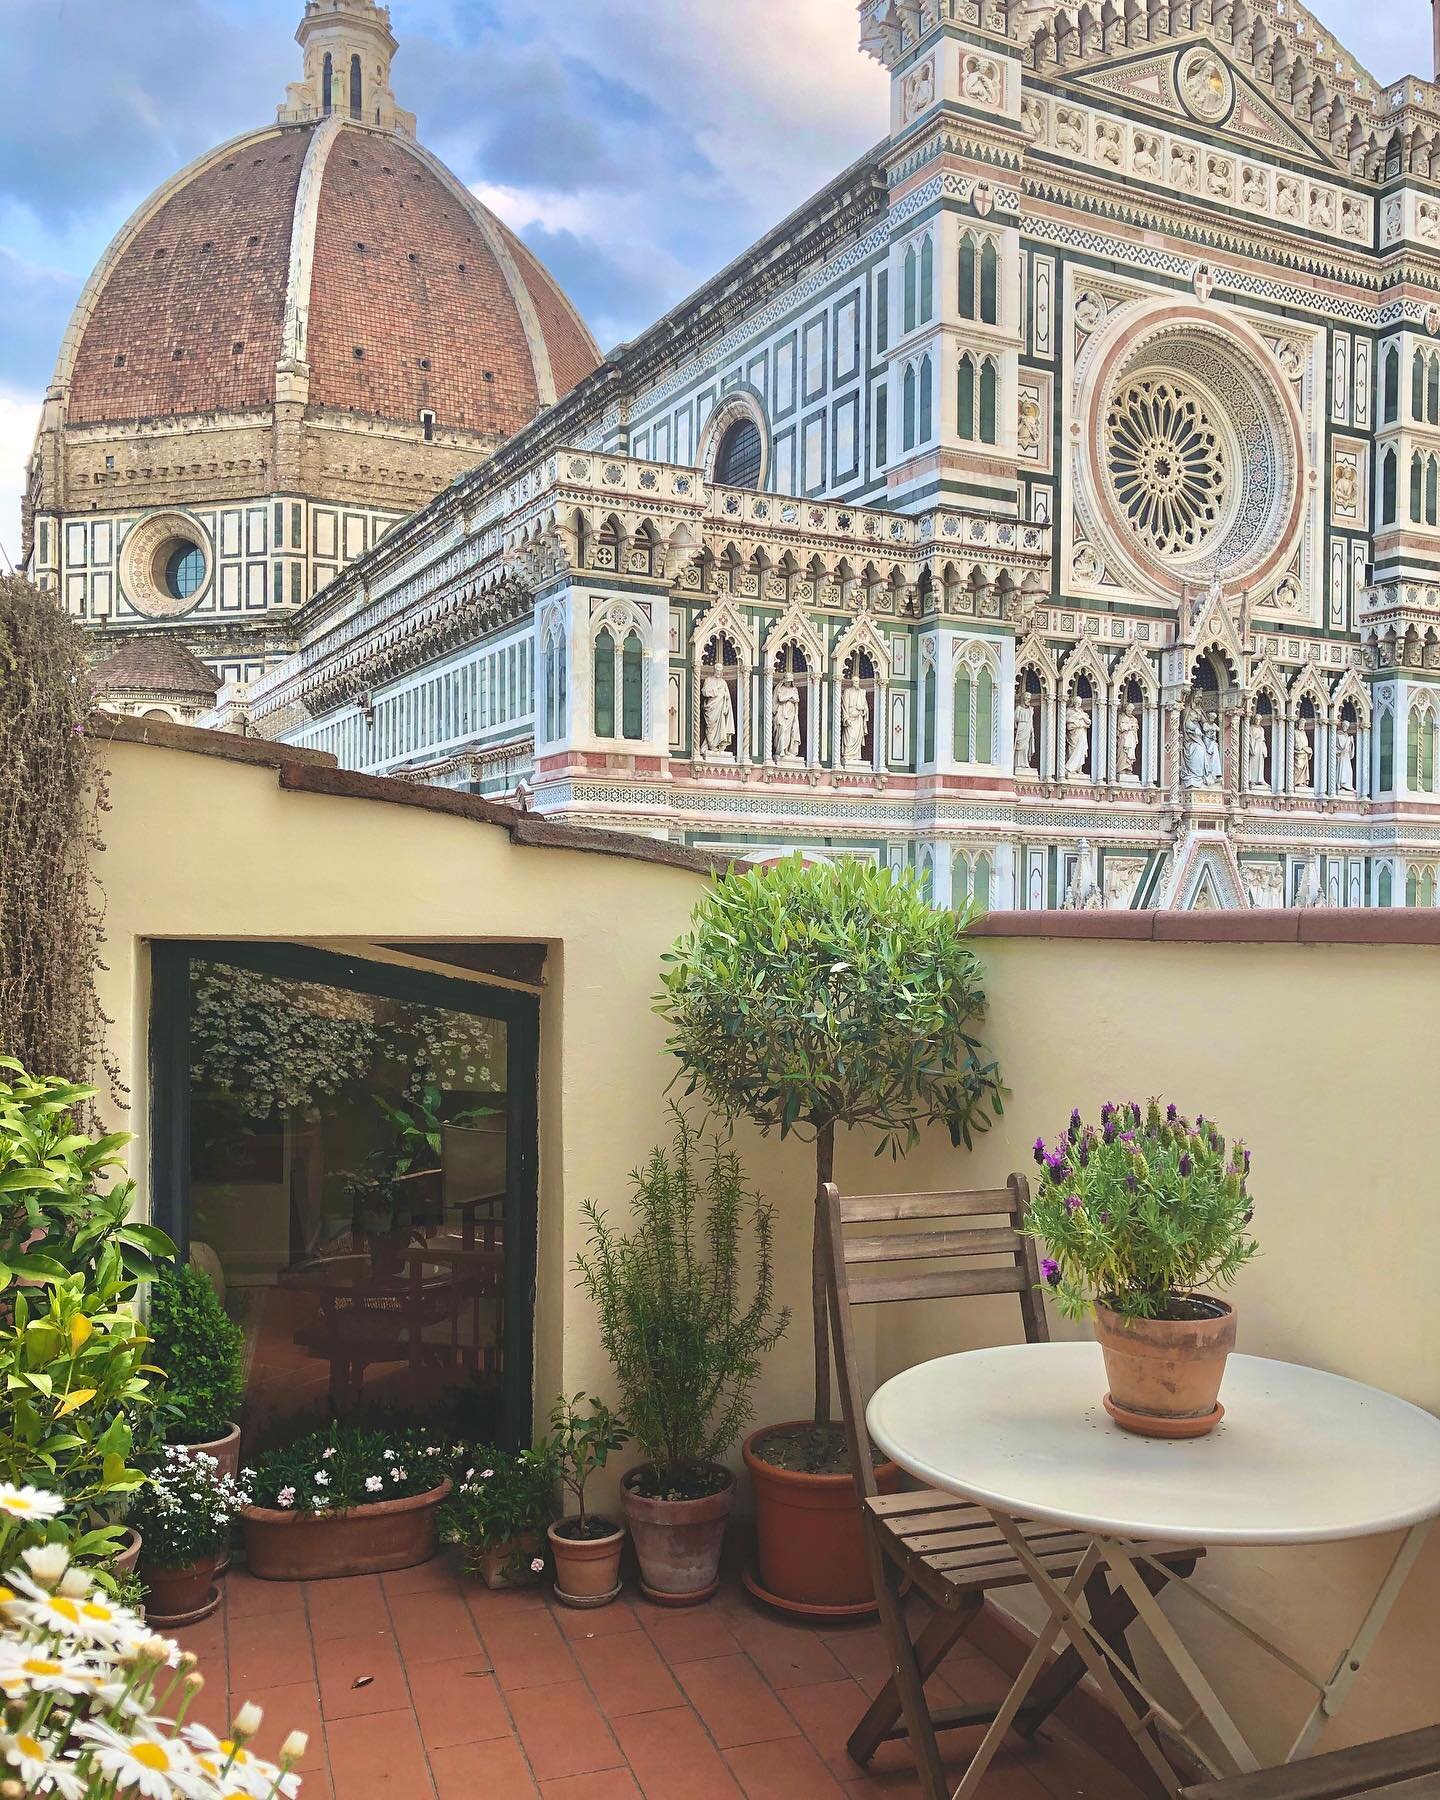 Soon there will be flowers. Soon we will bloom again!
Our beautiful Duomo @museofirenze reopens today after almost two months.
2021 keeps getting better and better 😊